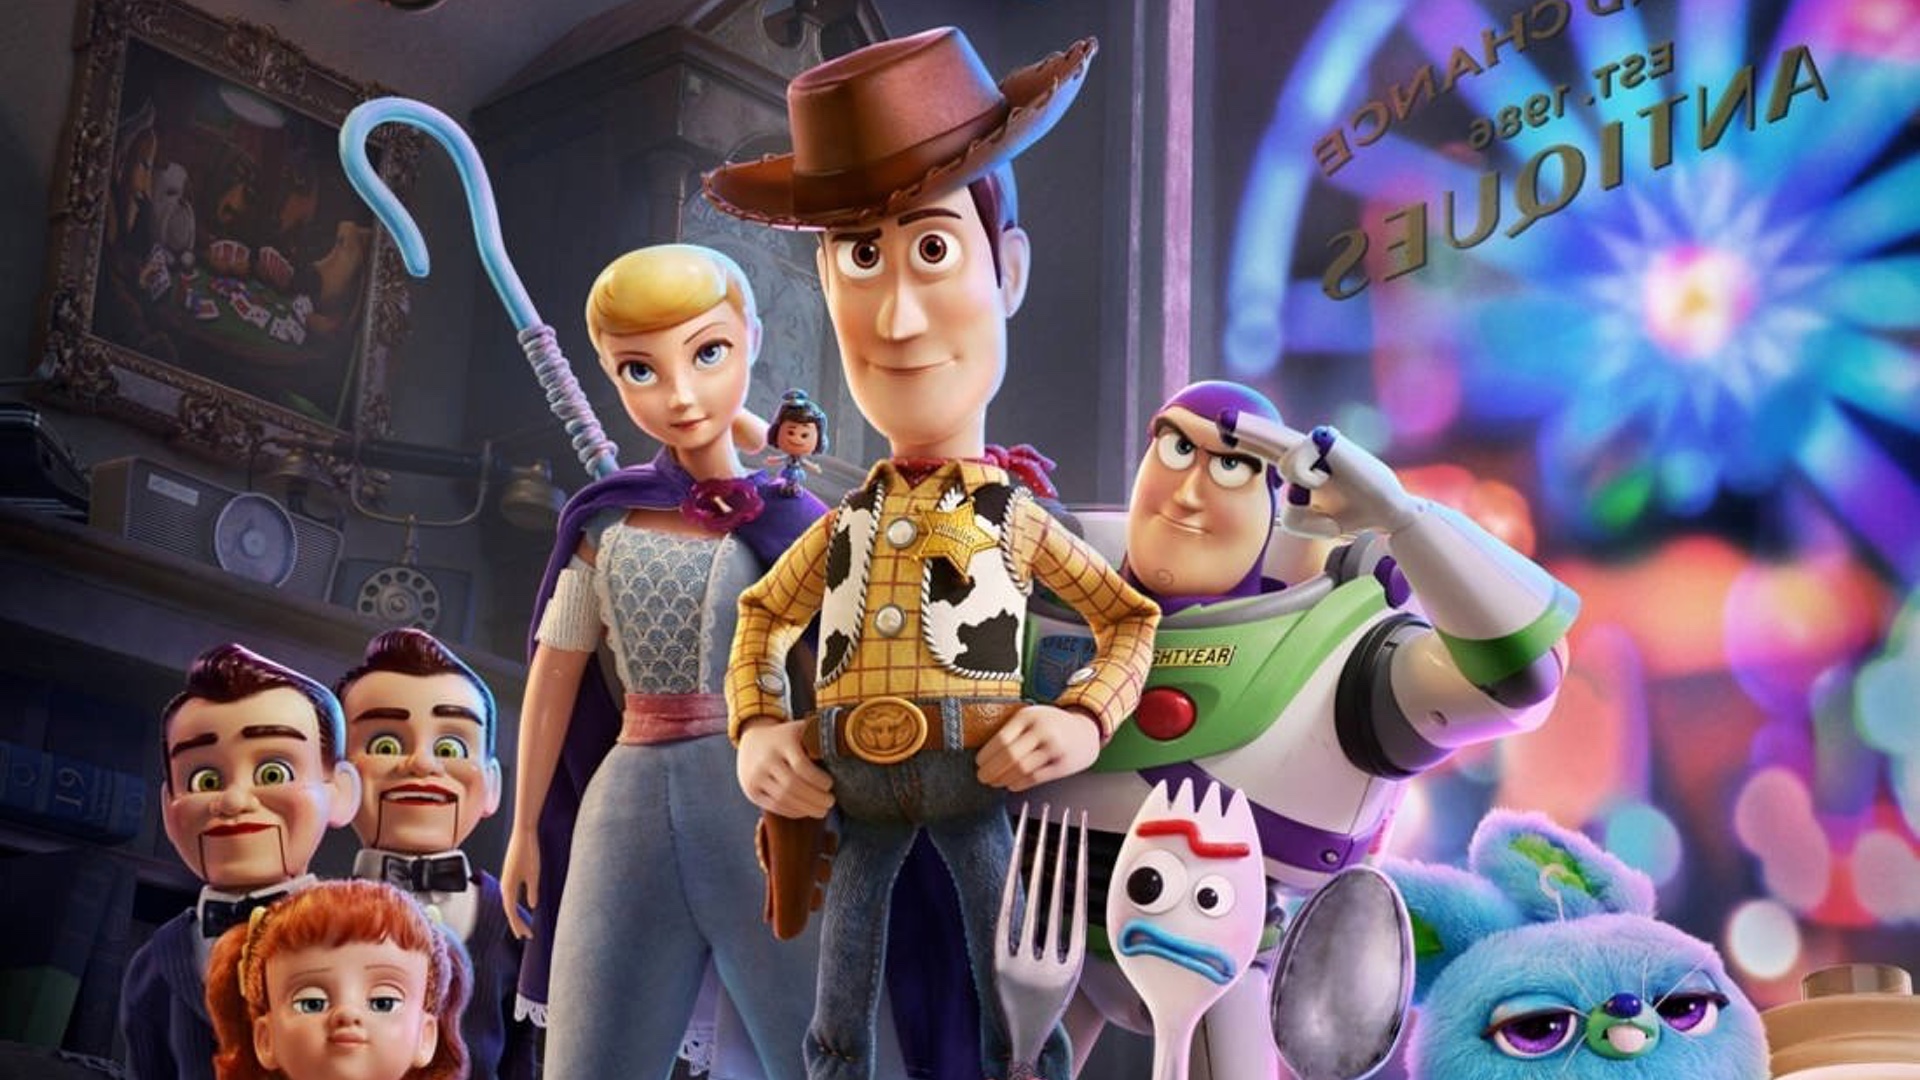 Wonderful Full Trailer and Poster for Pixars TOY STORY 4 GeekTyrant